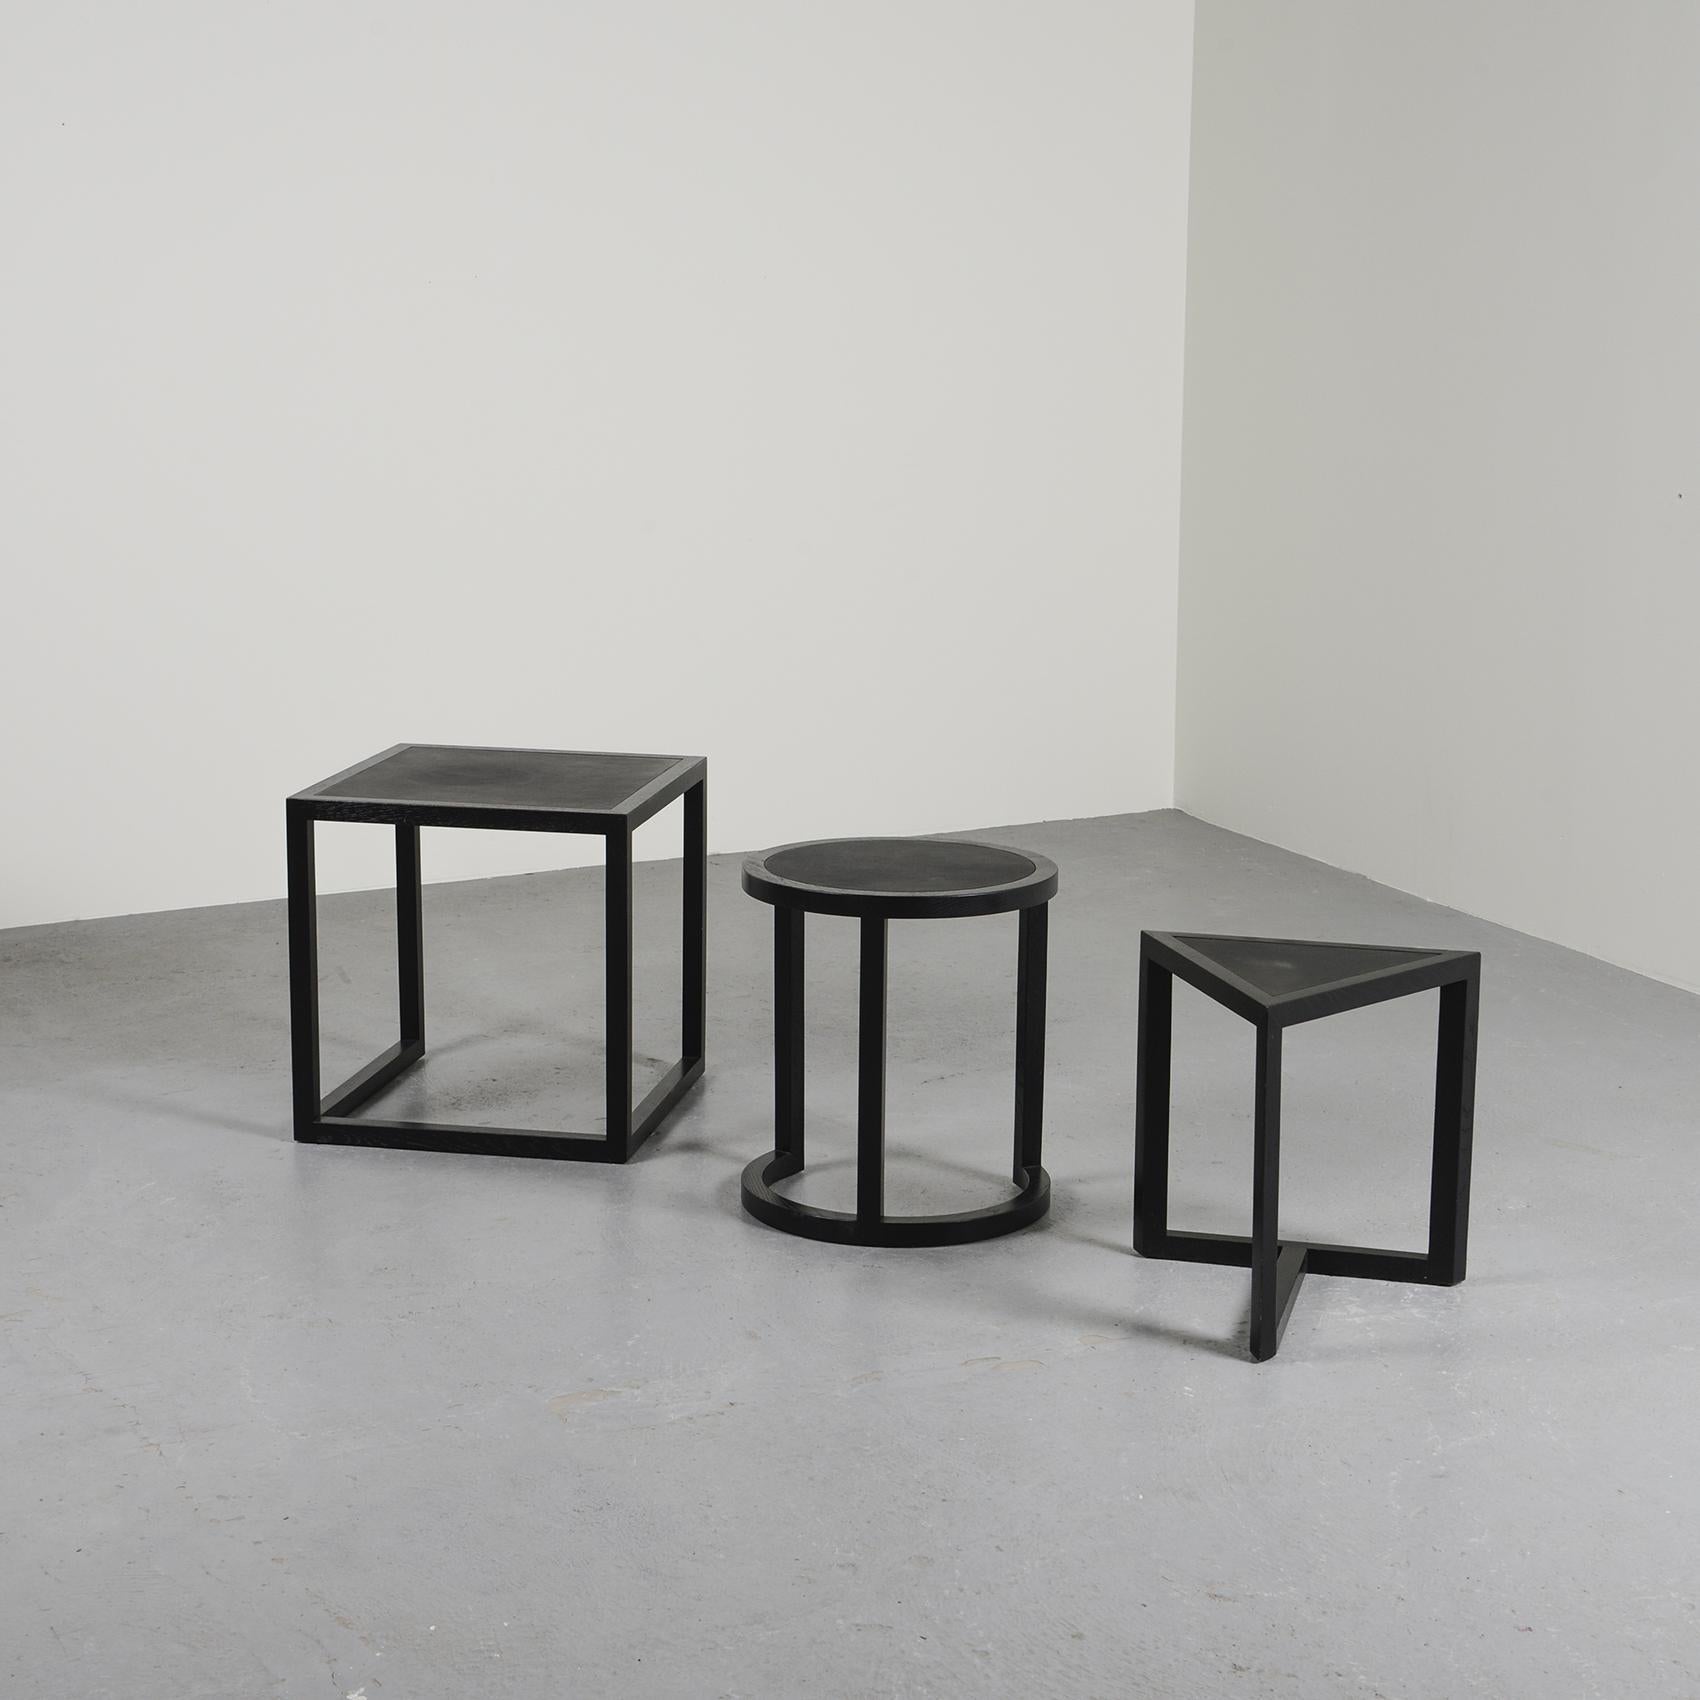 Nesting tables by Stefan Zwicky, model DS 9400, with a graphic design in square, round and triangular shapes.

The frame in black-stained solid oak is partially covered with leather on the tops.

Edition: De Sede, circa 1989.
Limited edition